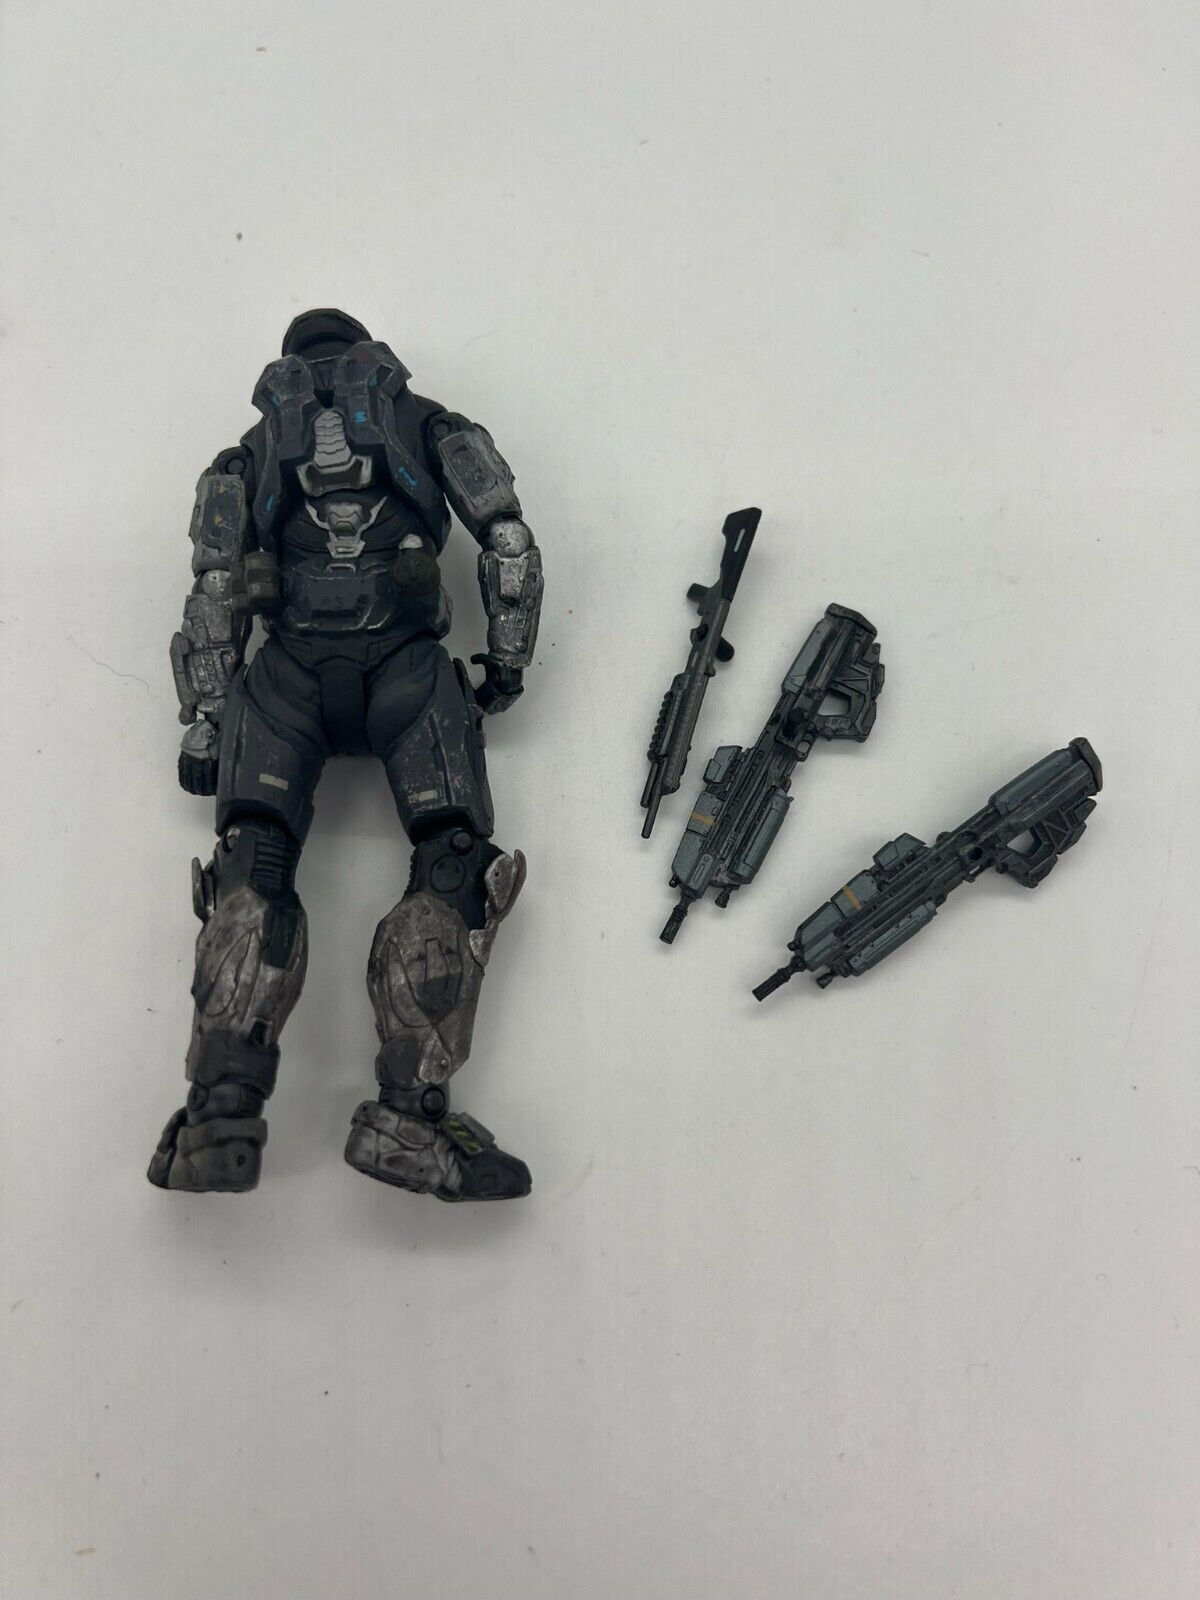 Halo Reach Series 1 NOBLE SIX 6 Action Figure McFarlane 2010 w/accessories